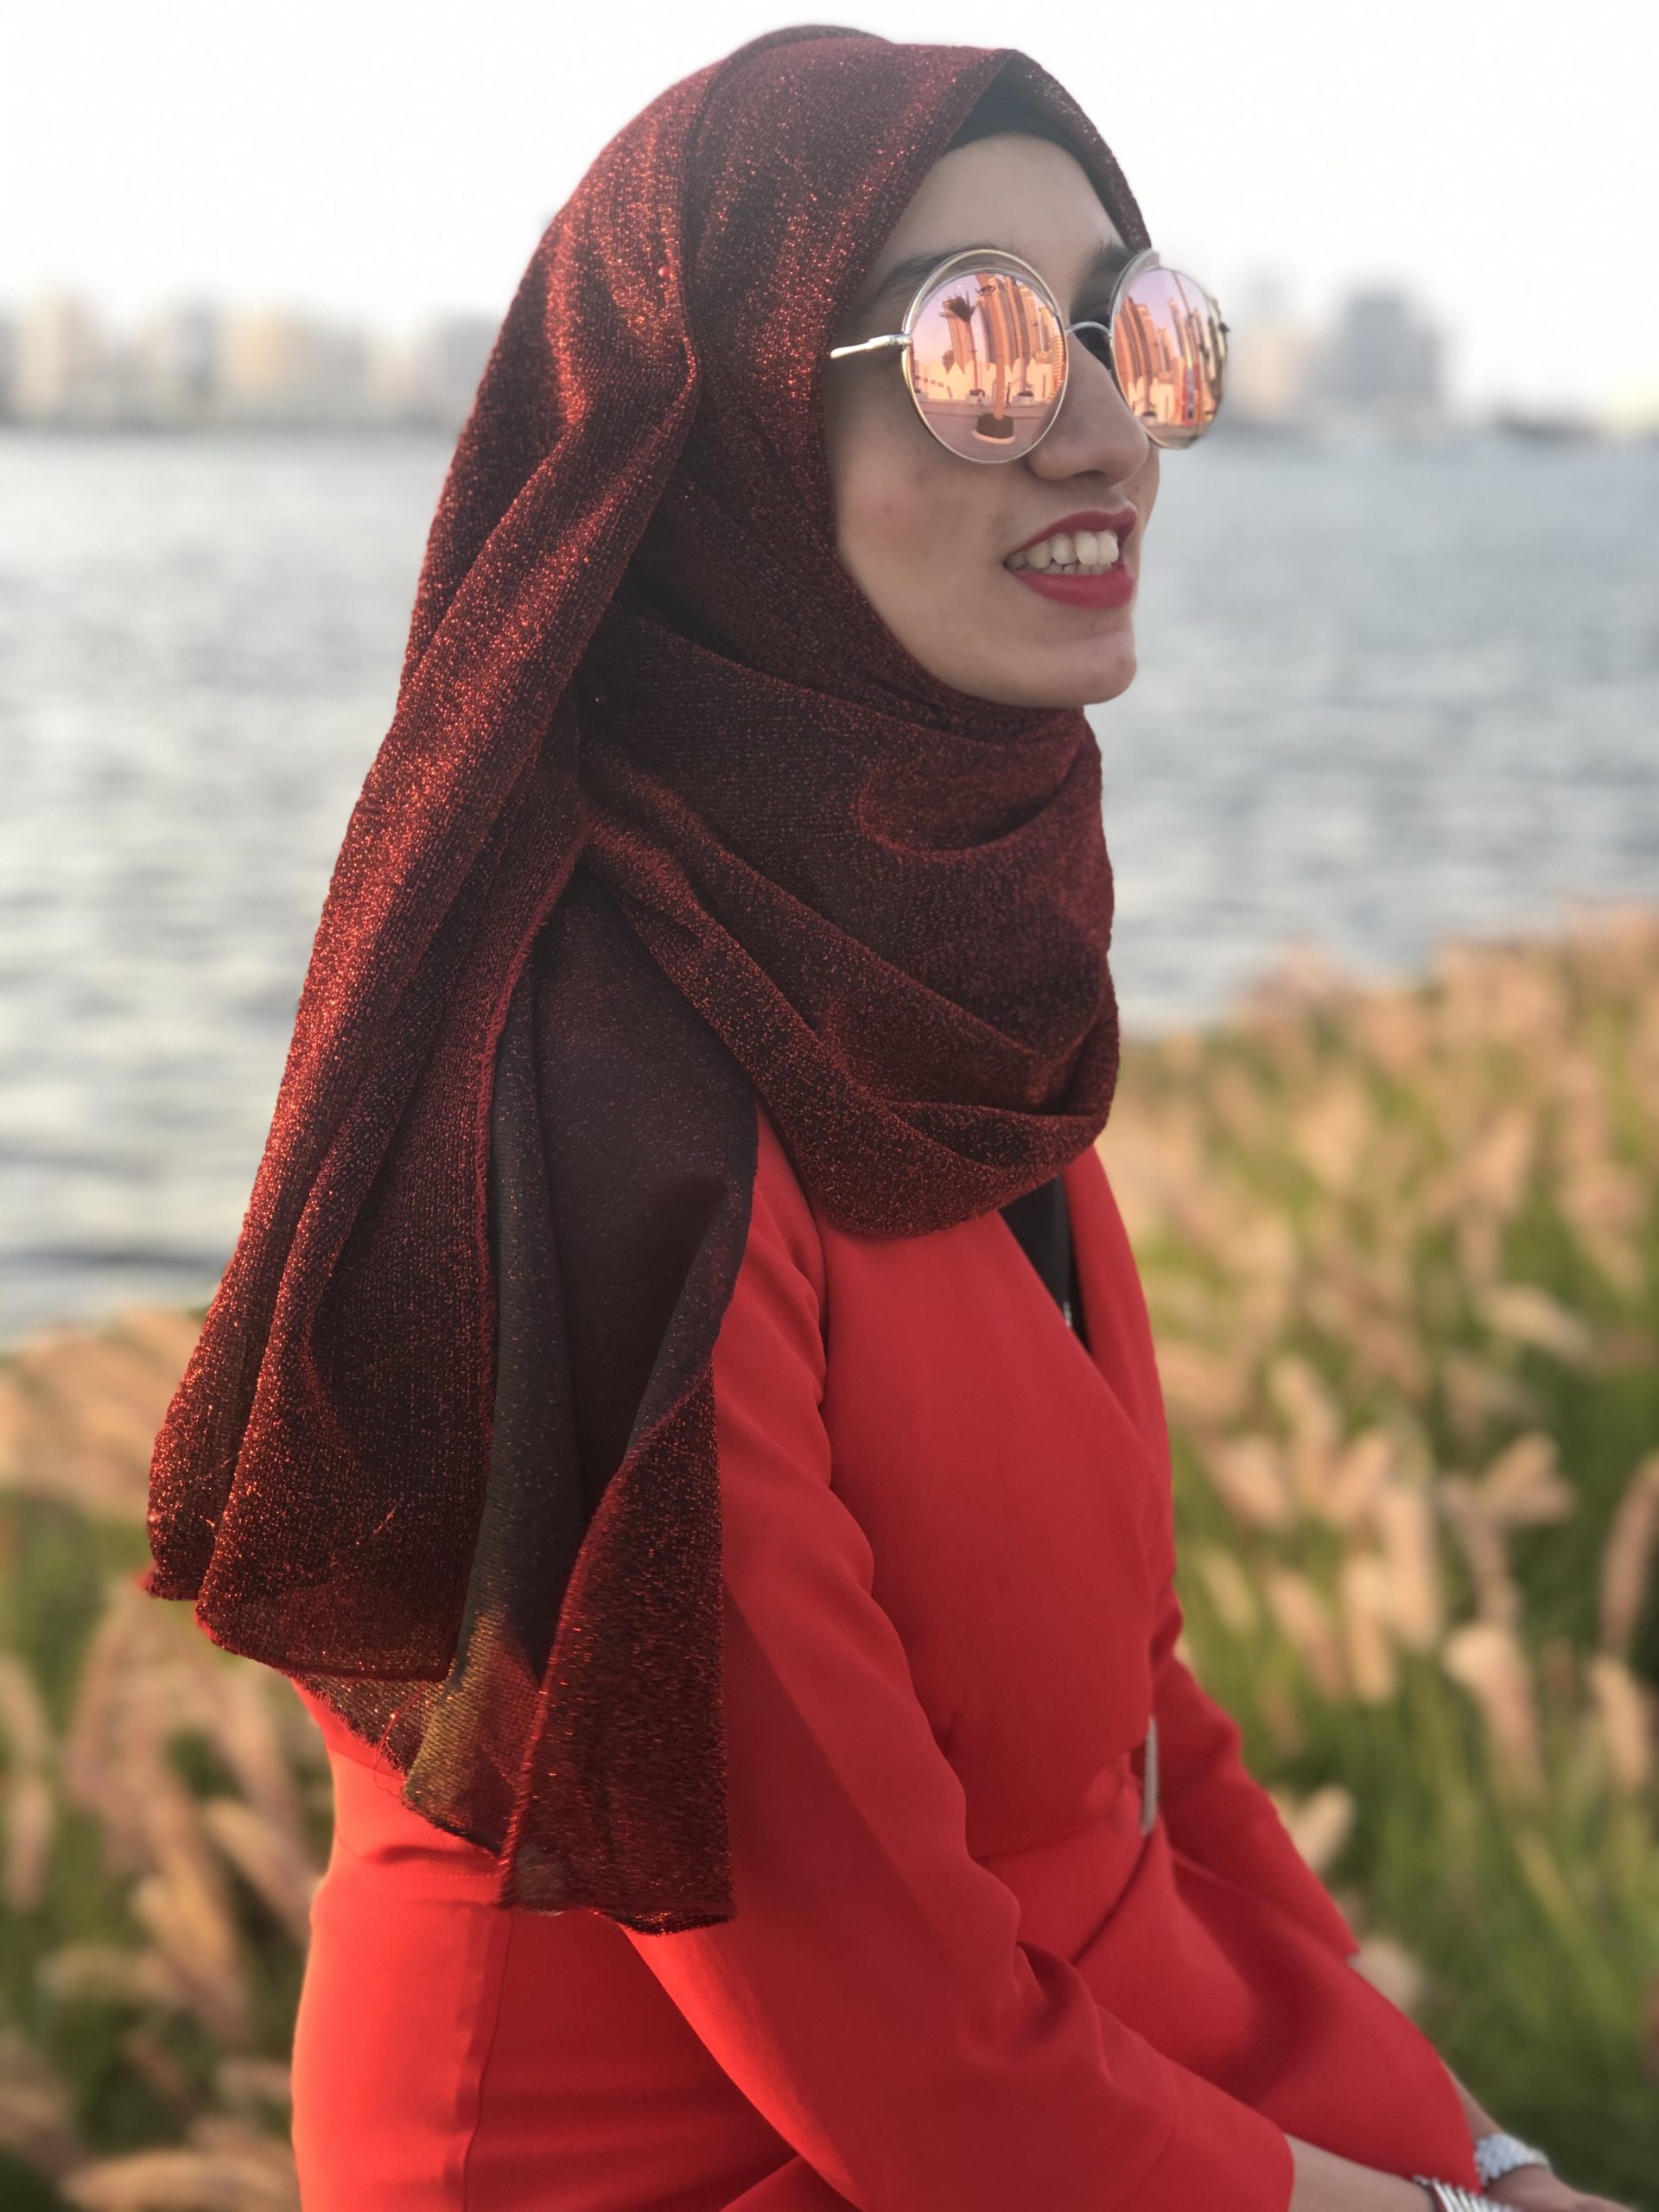 Things I said Alhumdulillah for in March 2020…